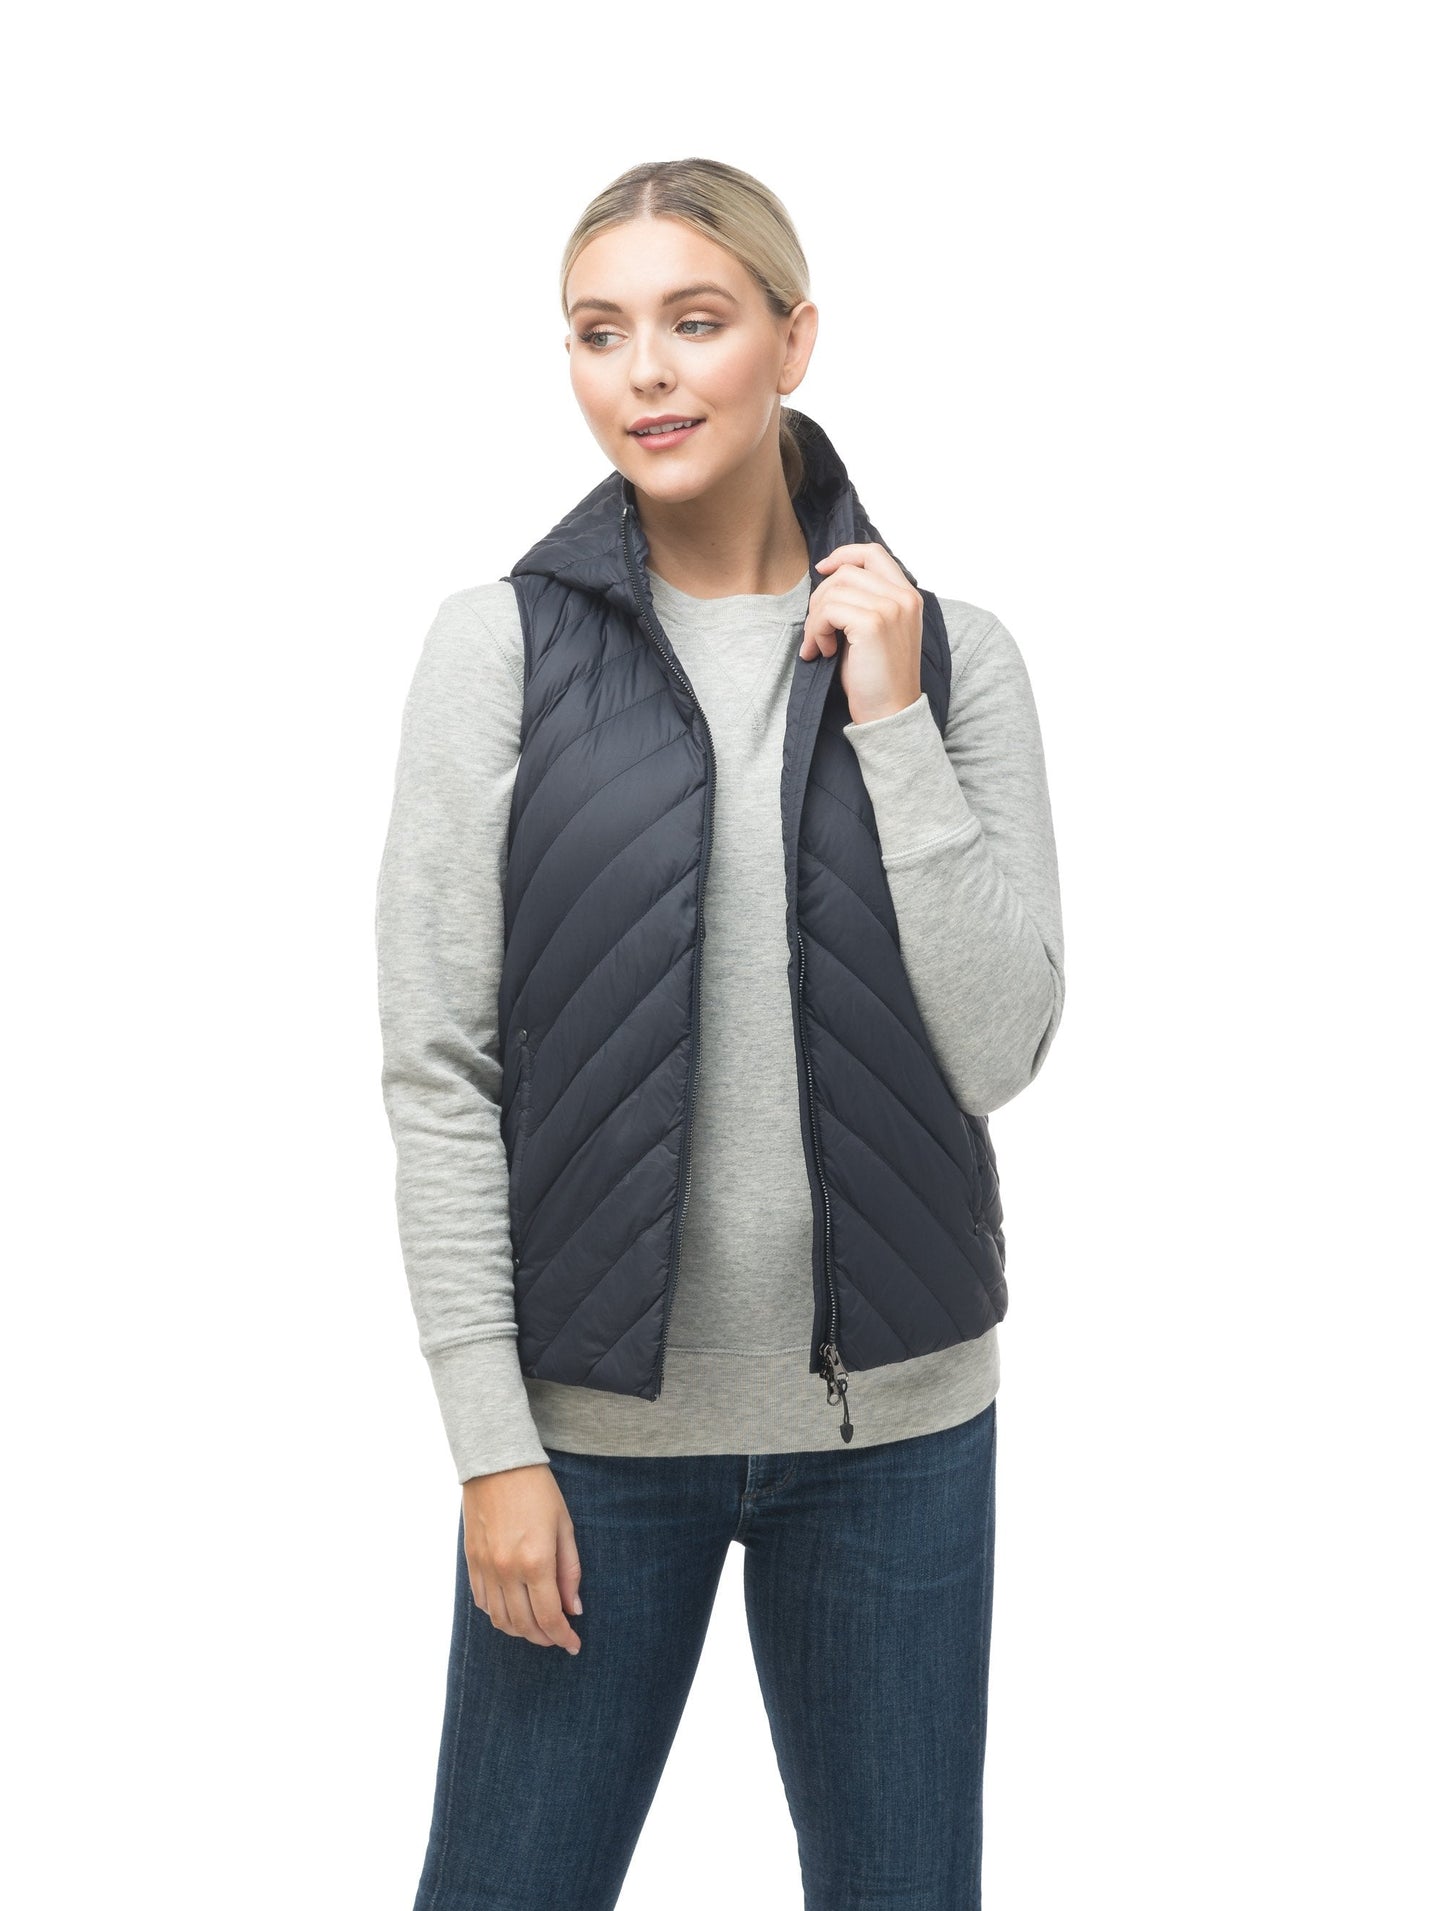 Women's down filled vest with diagonal quilting pattern throughout in Navy